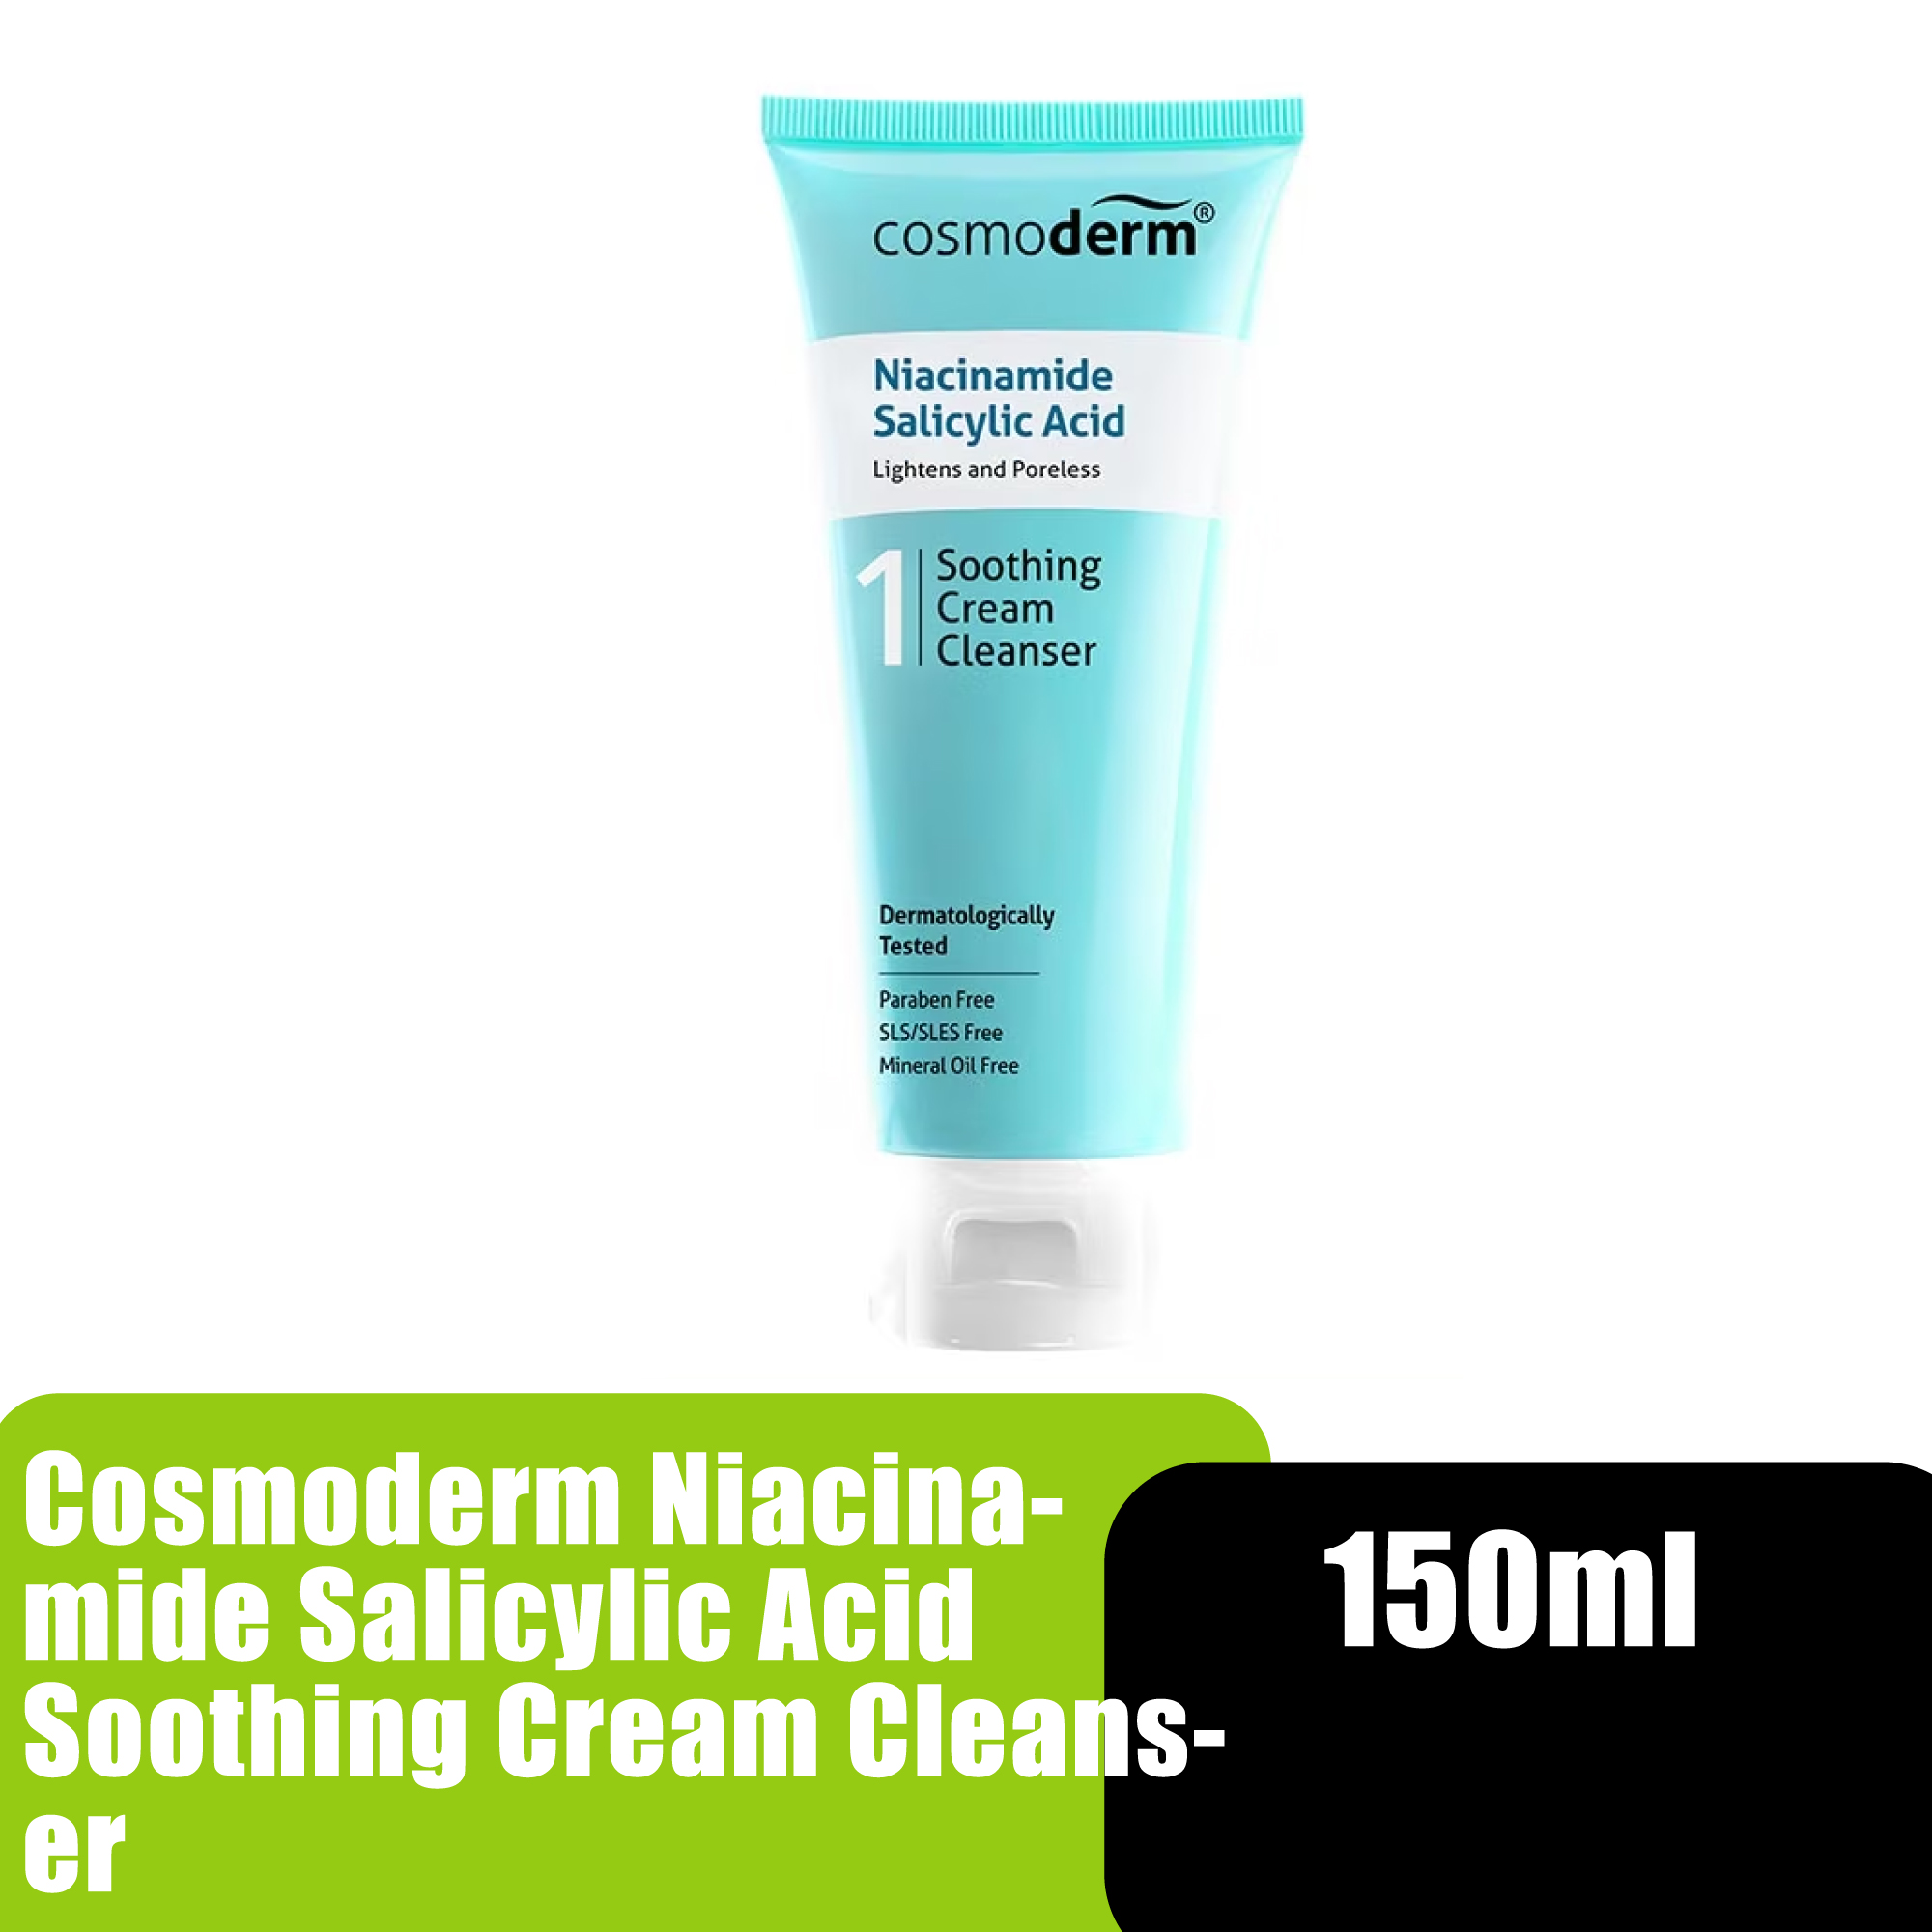 Cosmoderm Niacinamide Salicylic Acid Soothing Cream Cleanser 150ml (Face Wash)